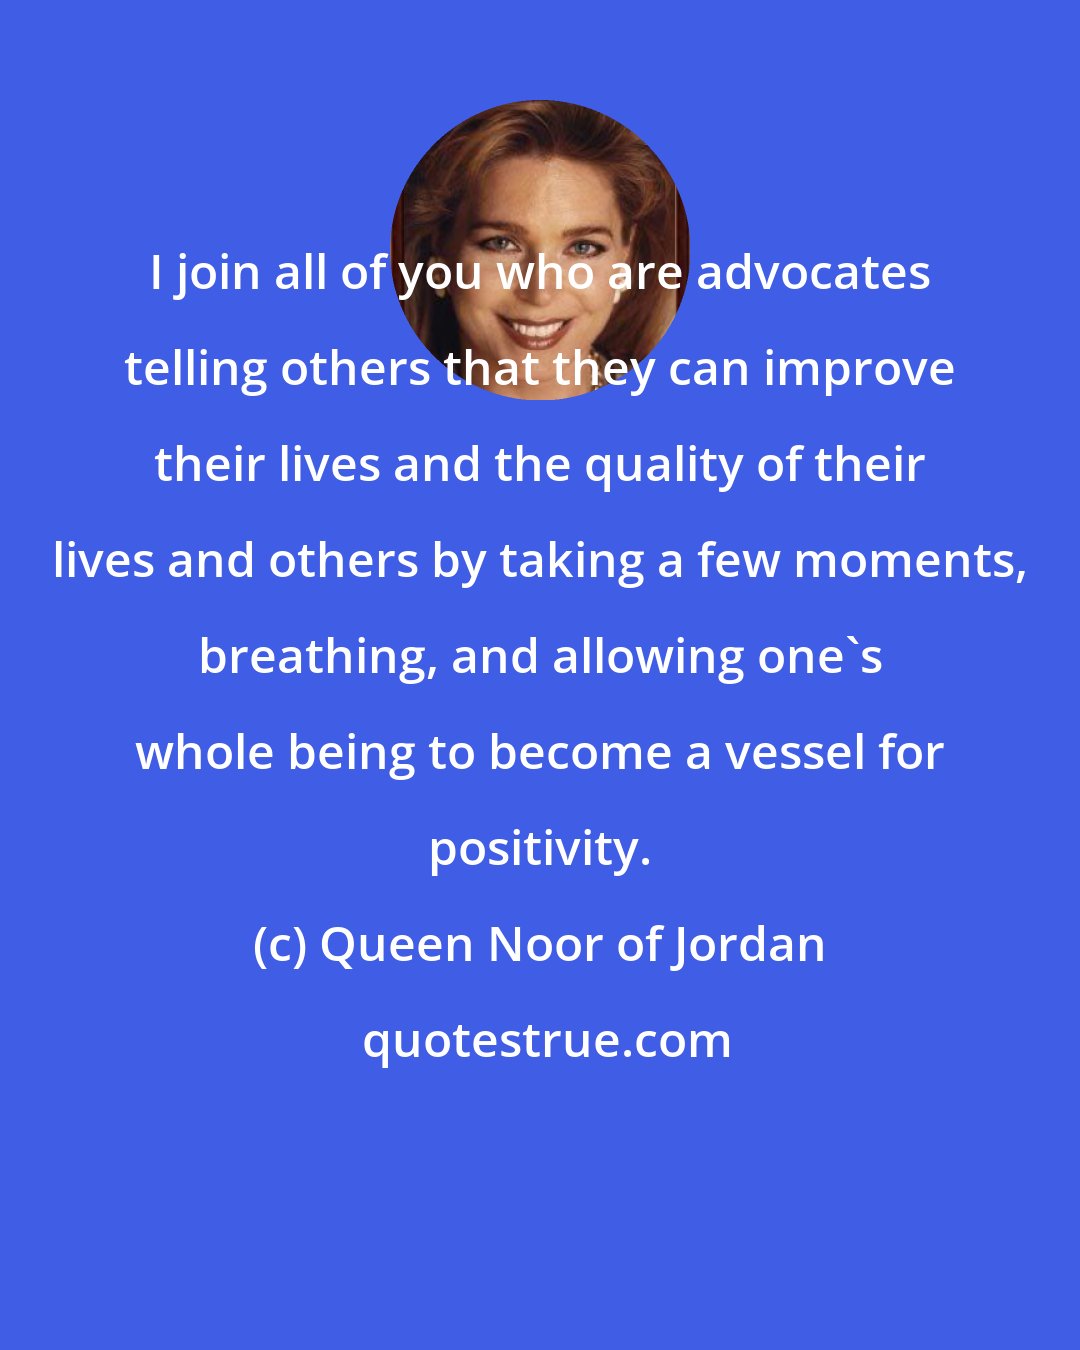 Queen Noor of Jordan: I join all of you who are advocates telling others that they can improve their lives and the quality of their lives and others by taking a few moments, breathing, and allowing one's whole being to become a vessel for positivity.